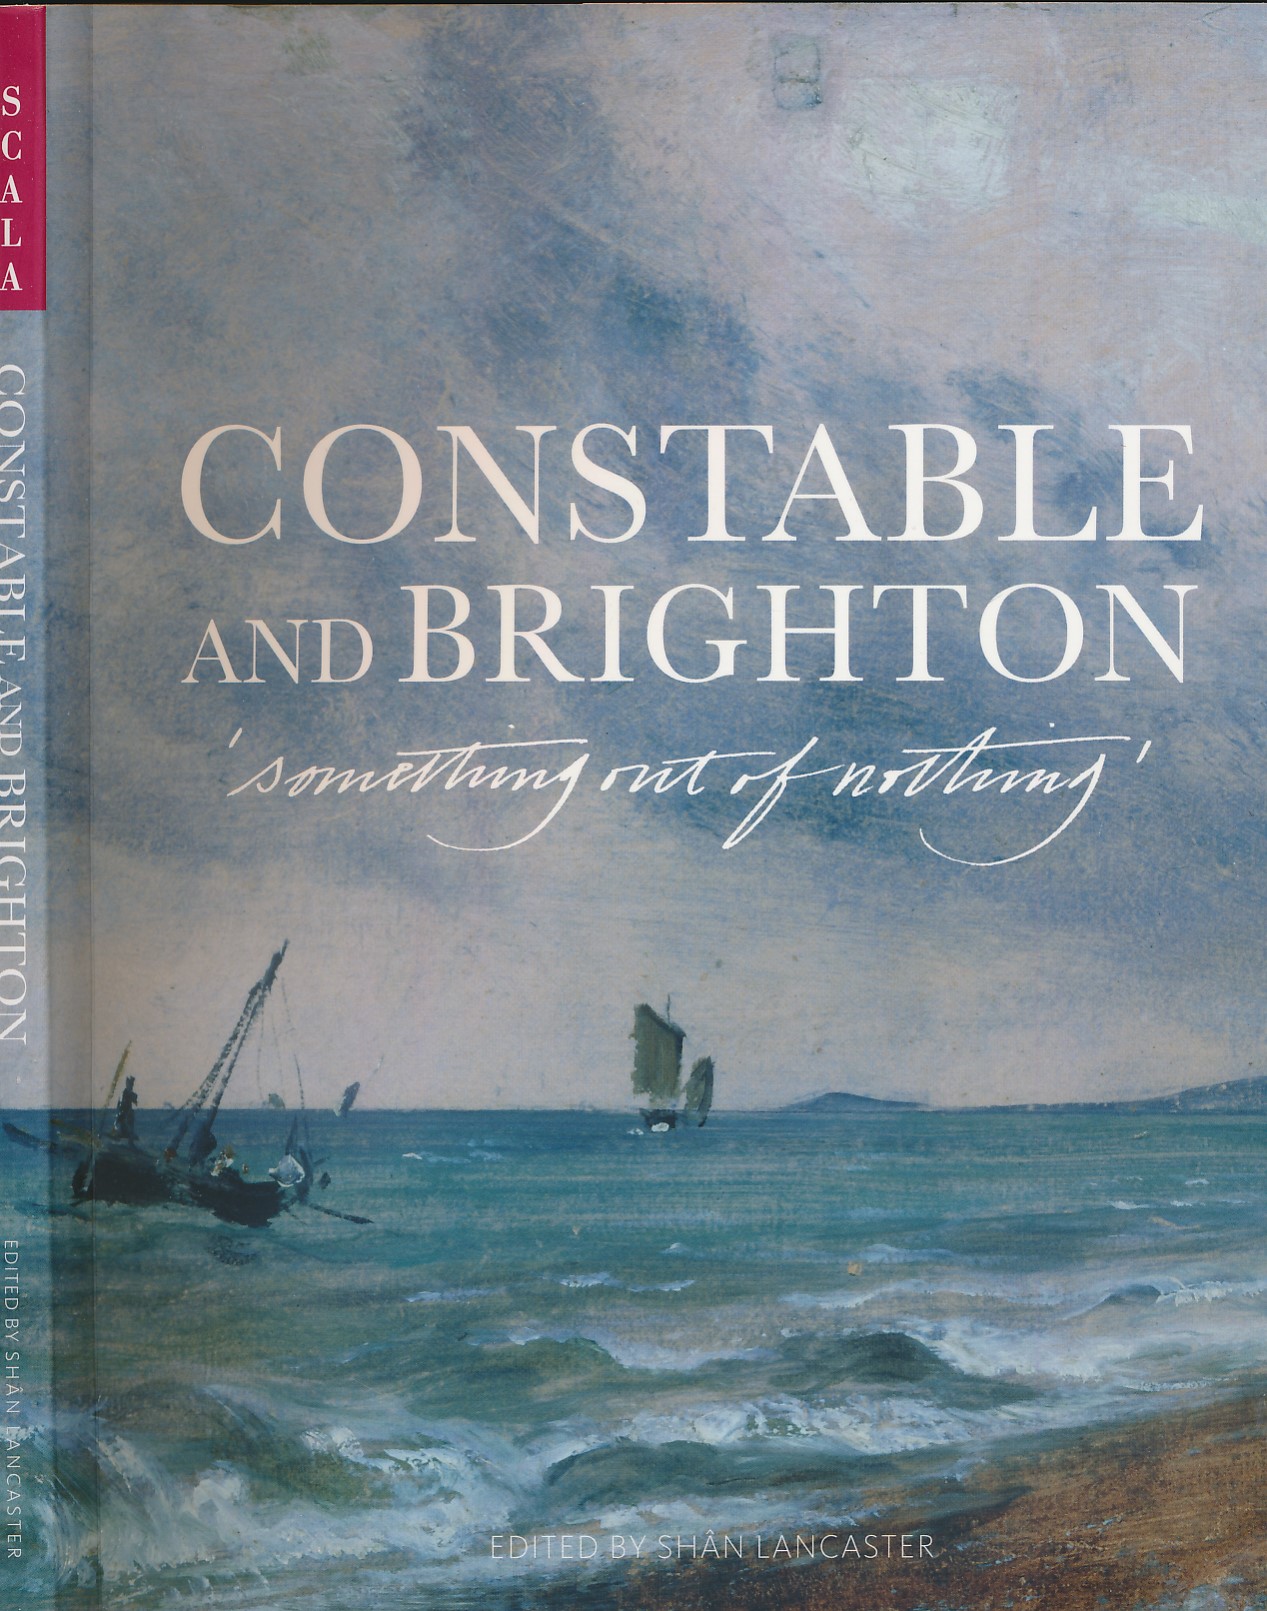 Constable and Brighton 'Something Out of Nothing'